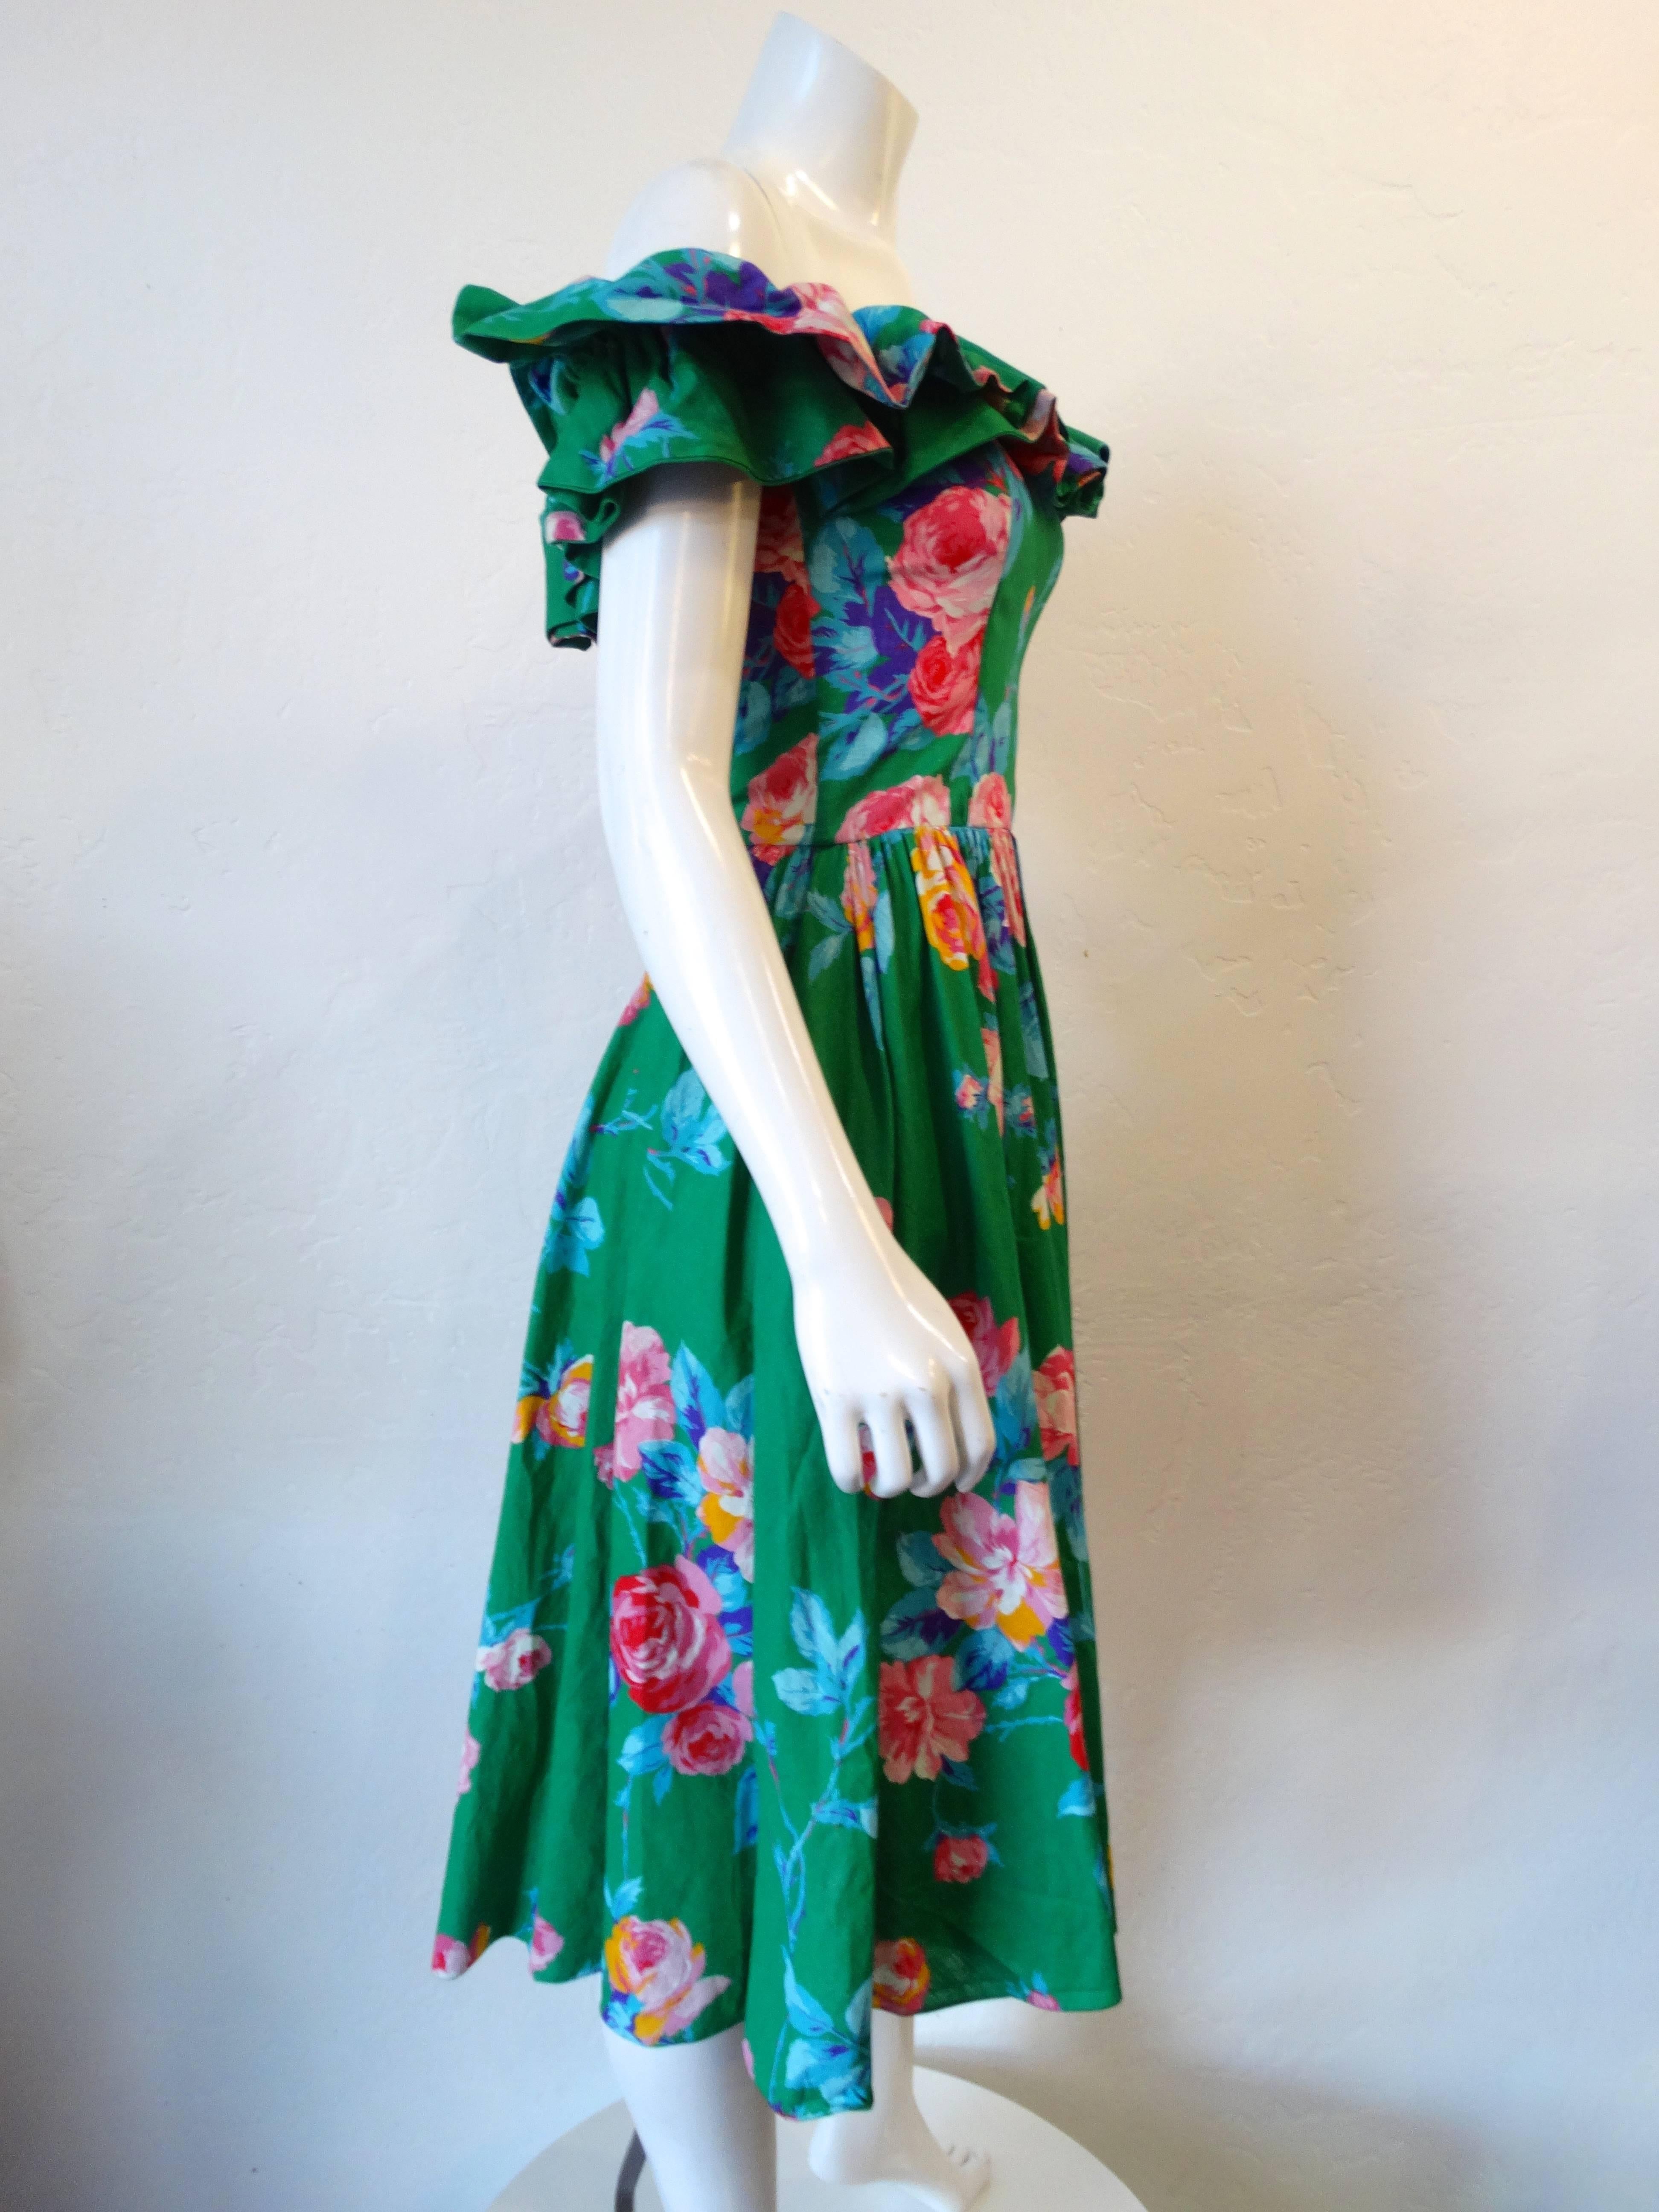 1980s does 1950s silhouette with our dress from S.G. Gilbert. This flirty little number features a bold colorful floral rose print in green, pink, blue and yellow. Ruffled neckline, can be worn off the shoulder. Boned bodice makes for a structured